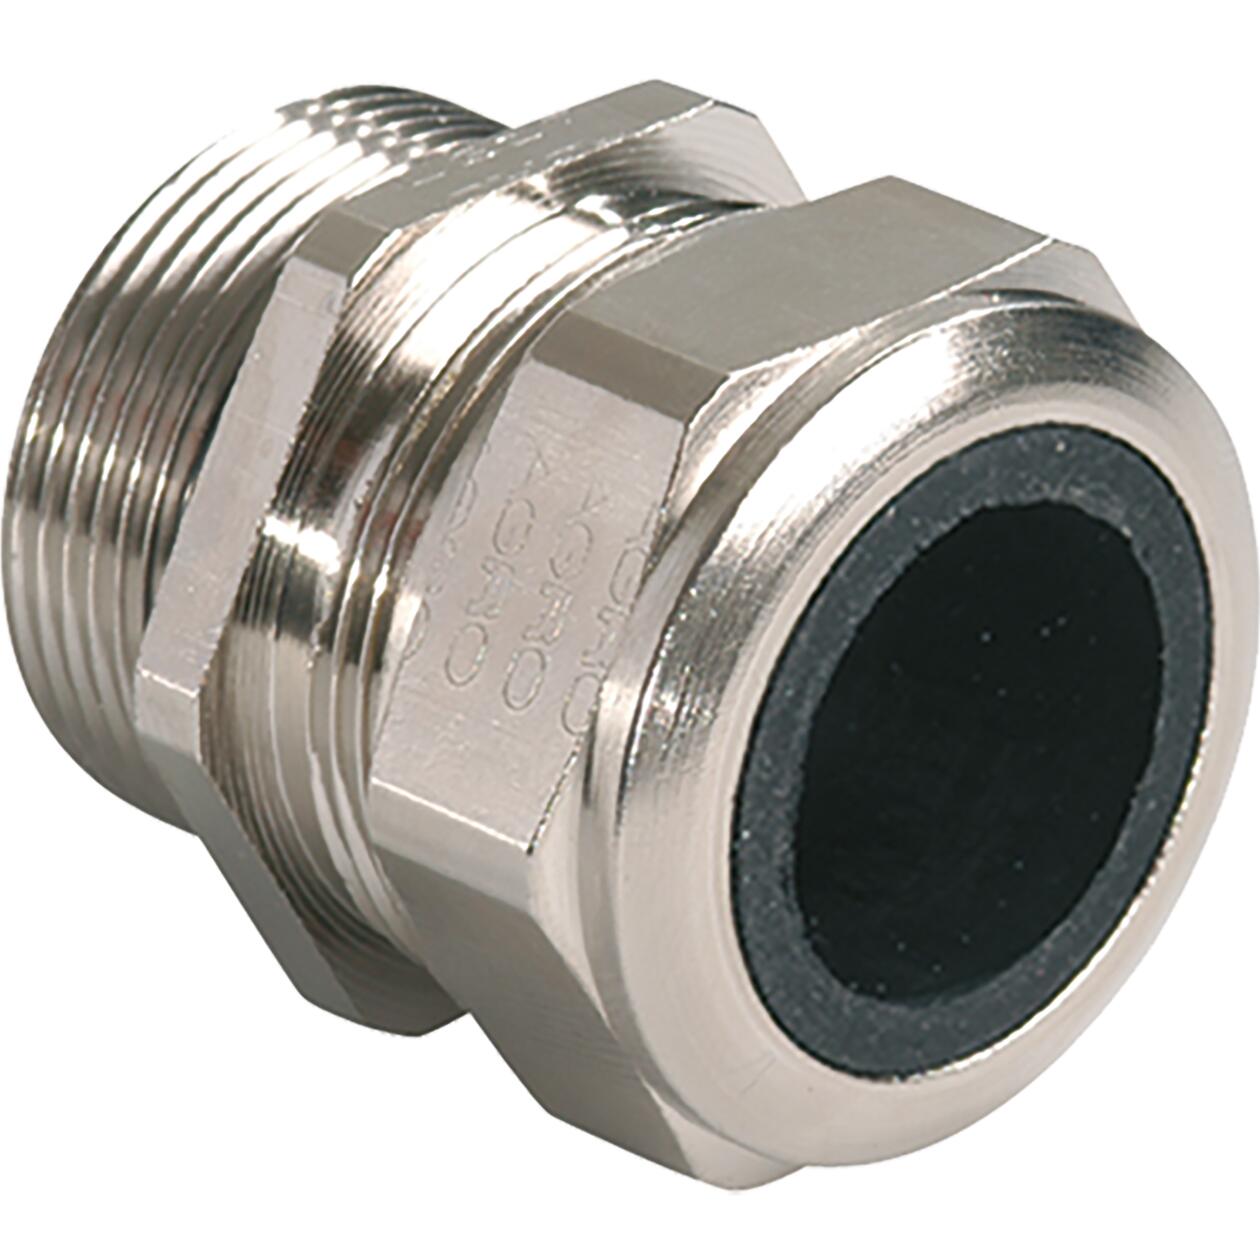 Cable glands Progress® nickel-plated brass, Progress® nickel-plated brass, Cable glands, Industrial products, Products